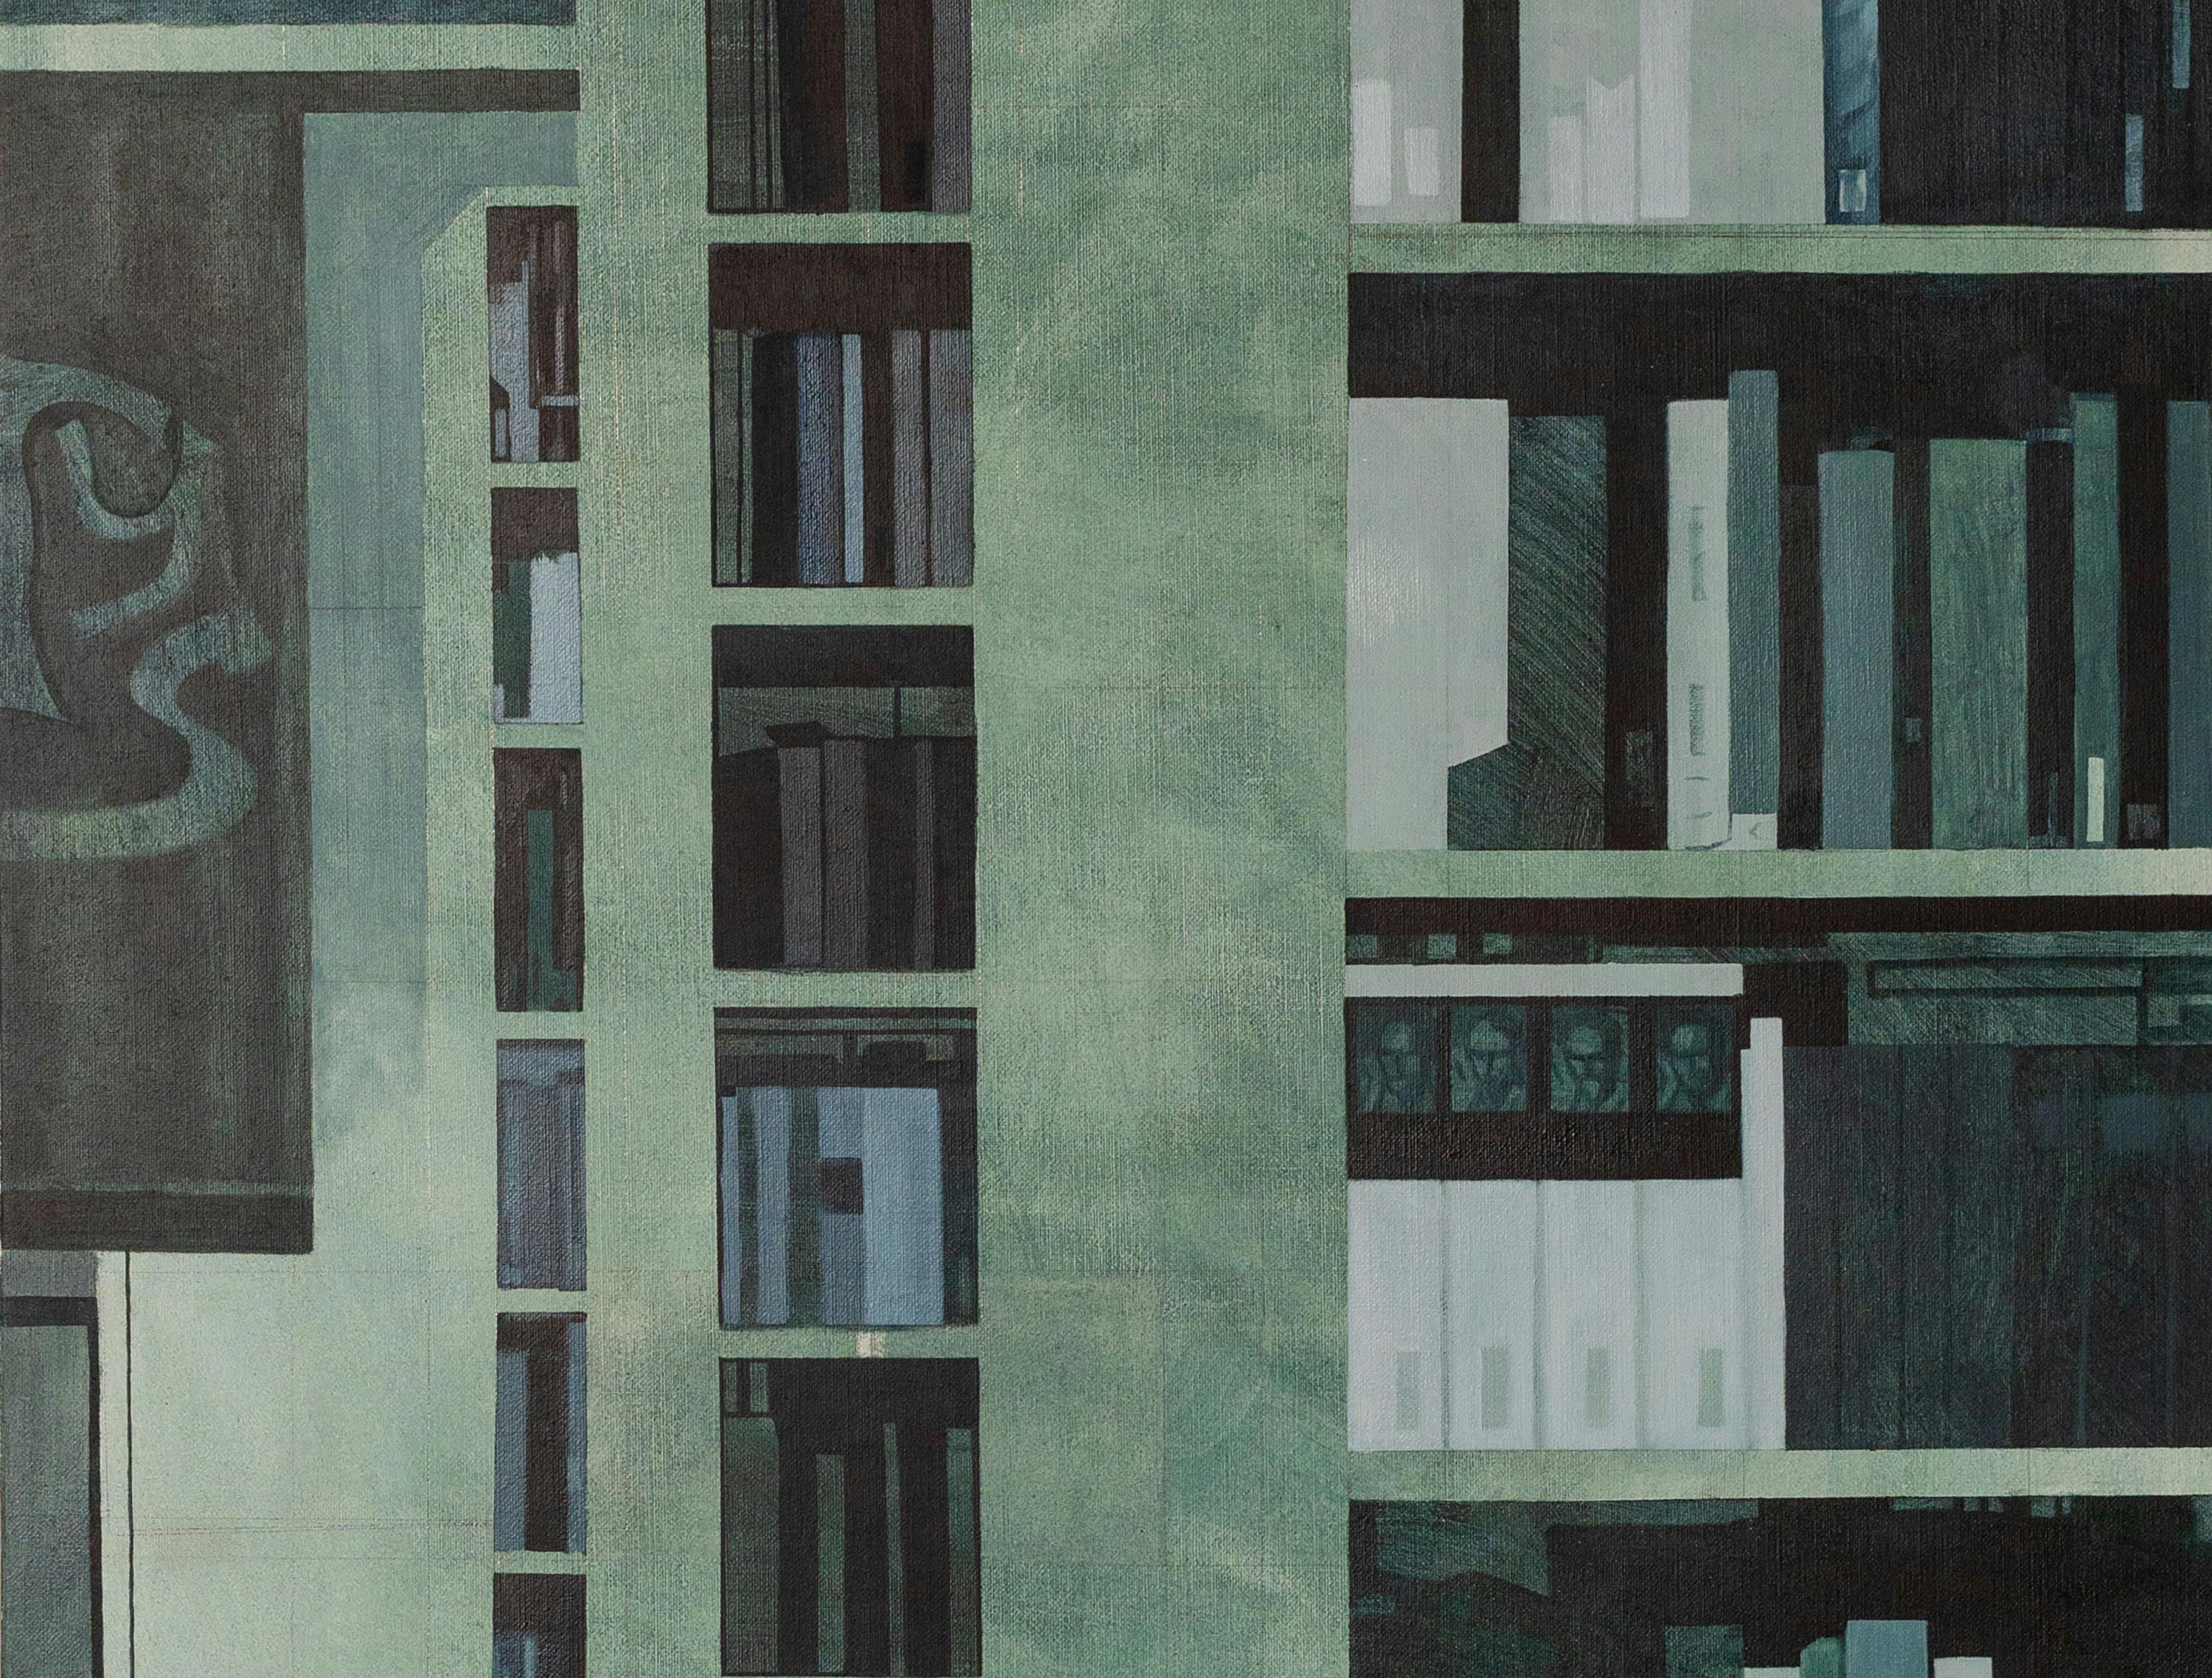 A detailed painting in blue and green hues of a shelf with book and various files